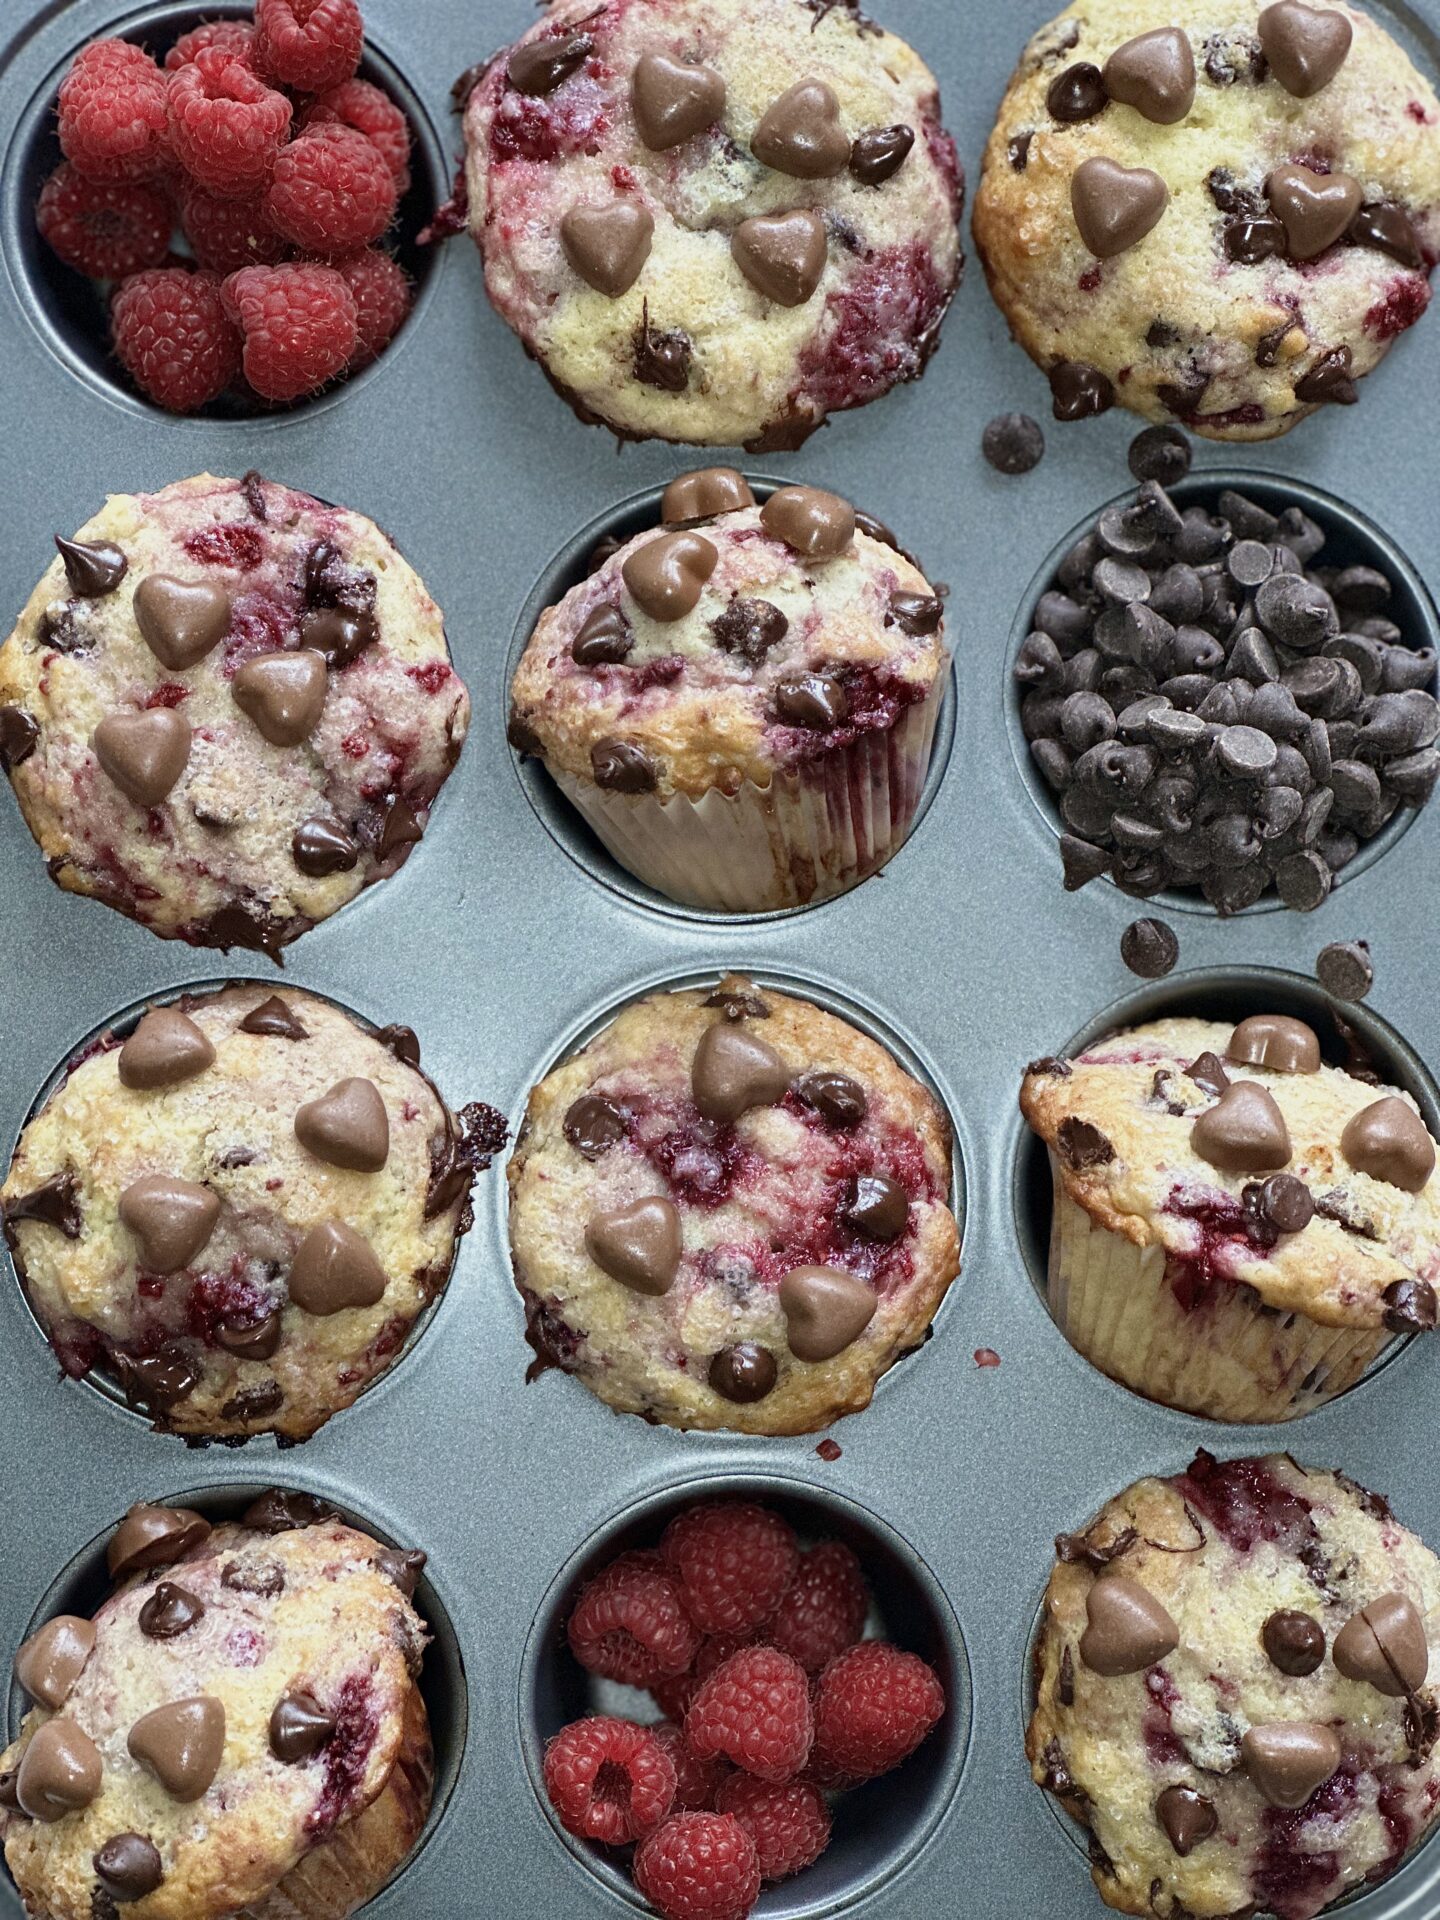  A tin of freshly baked muffins, brimming with raspberries and chocolate chips